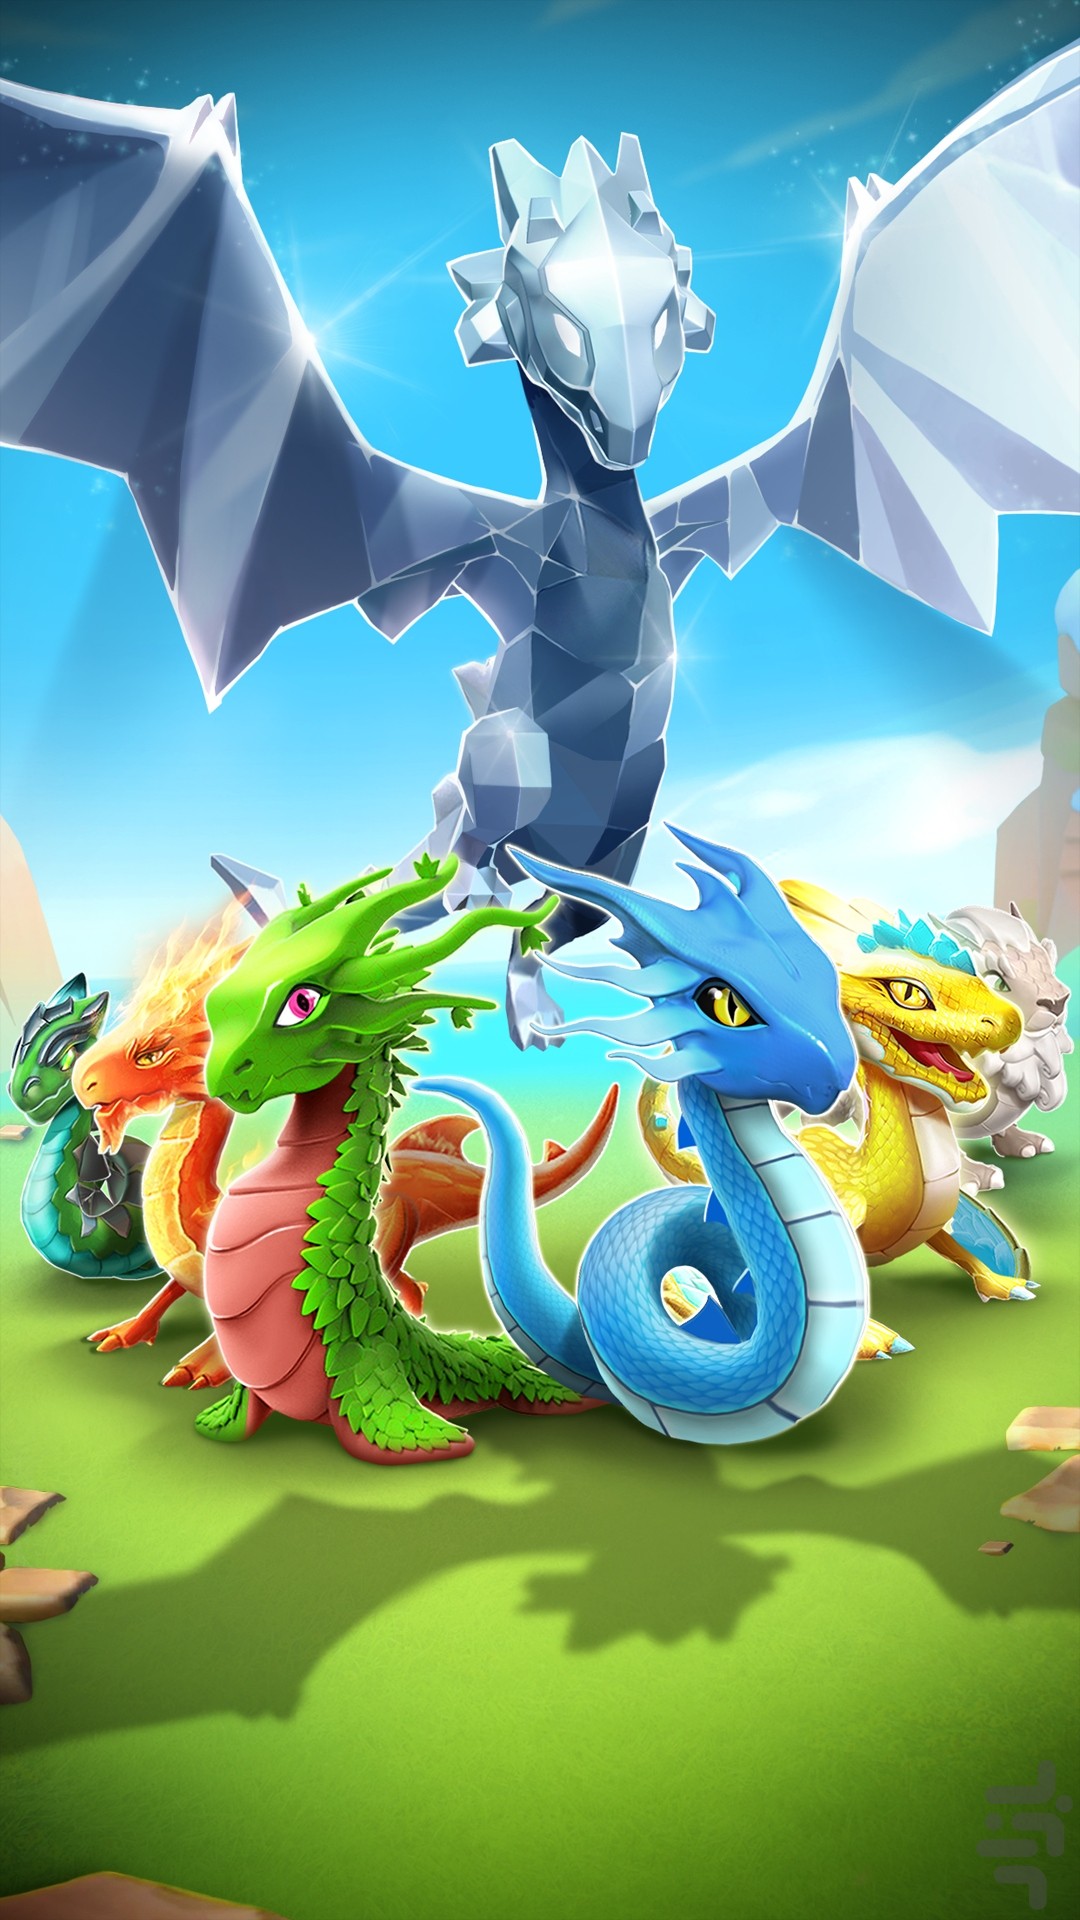 dragon mania legends download for pc windows 7